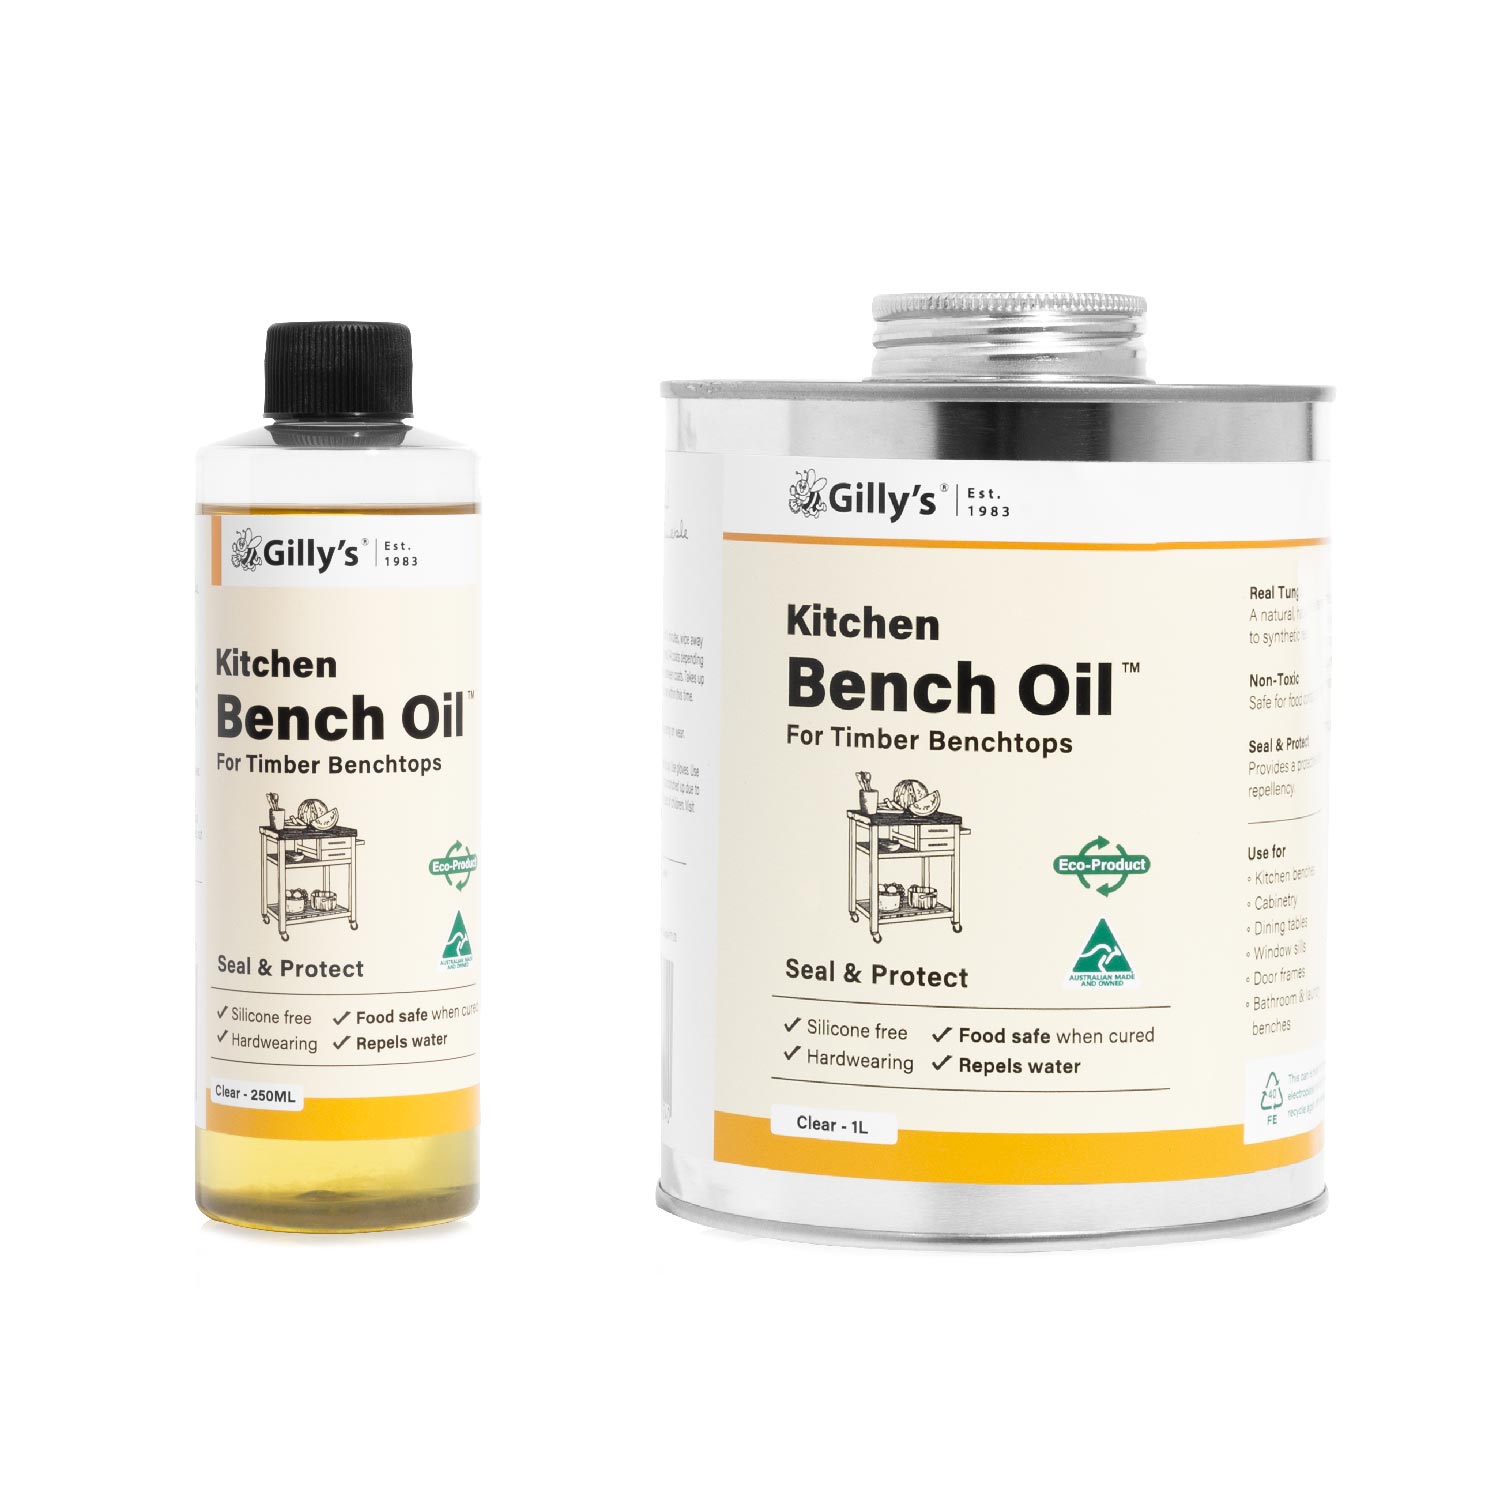 Kitchen Bench Oil (Clear) by Gilly's